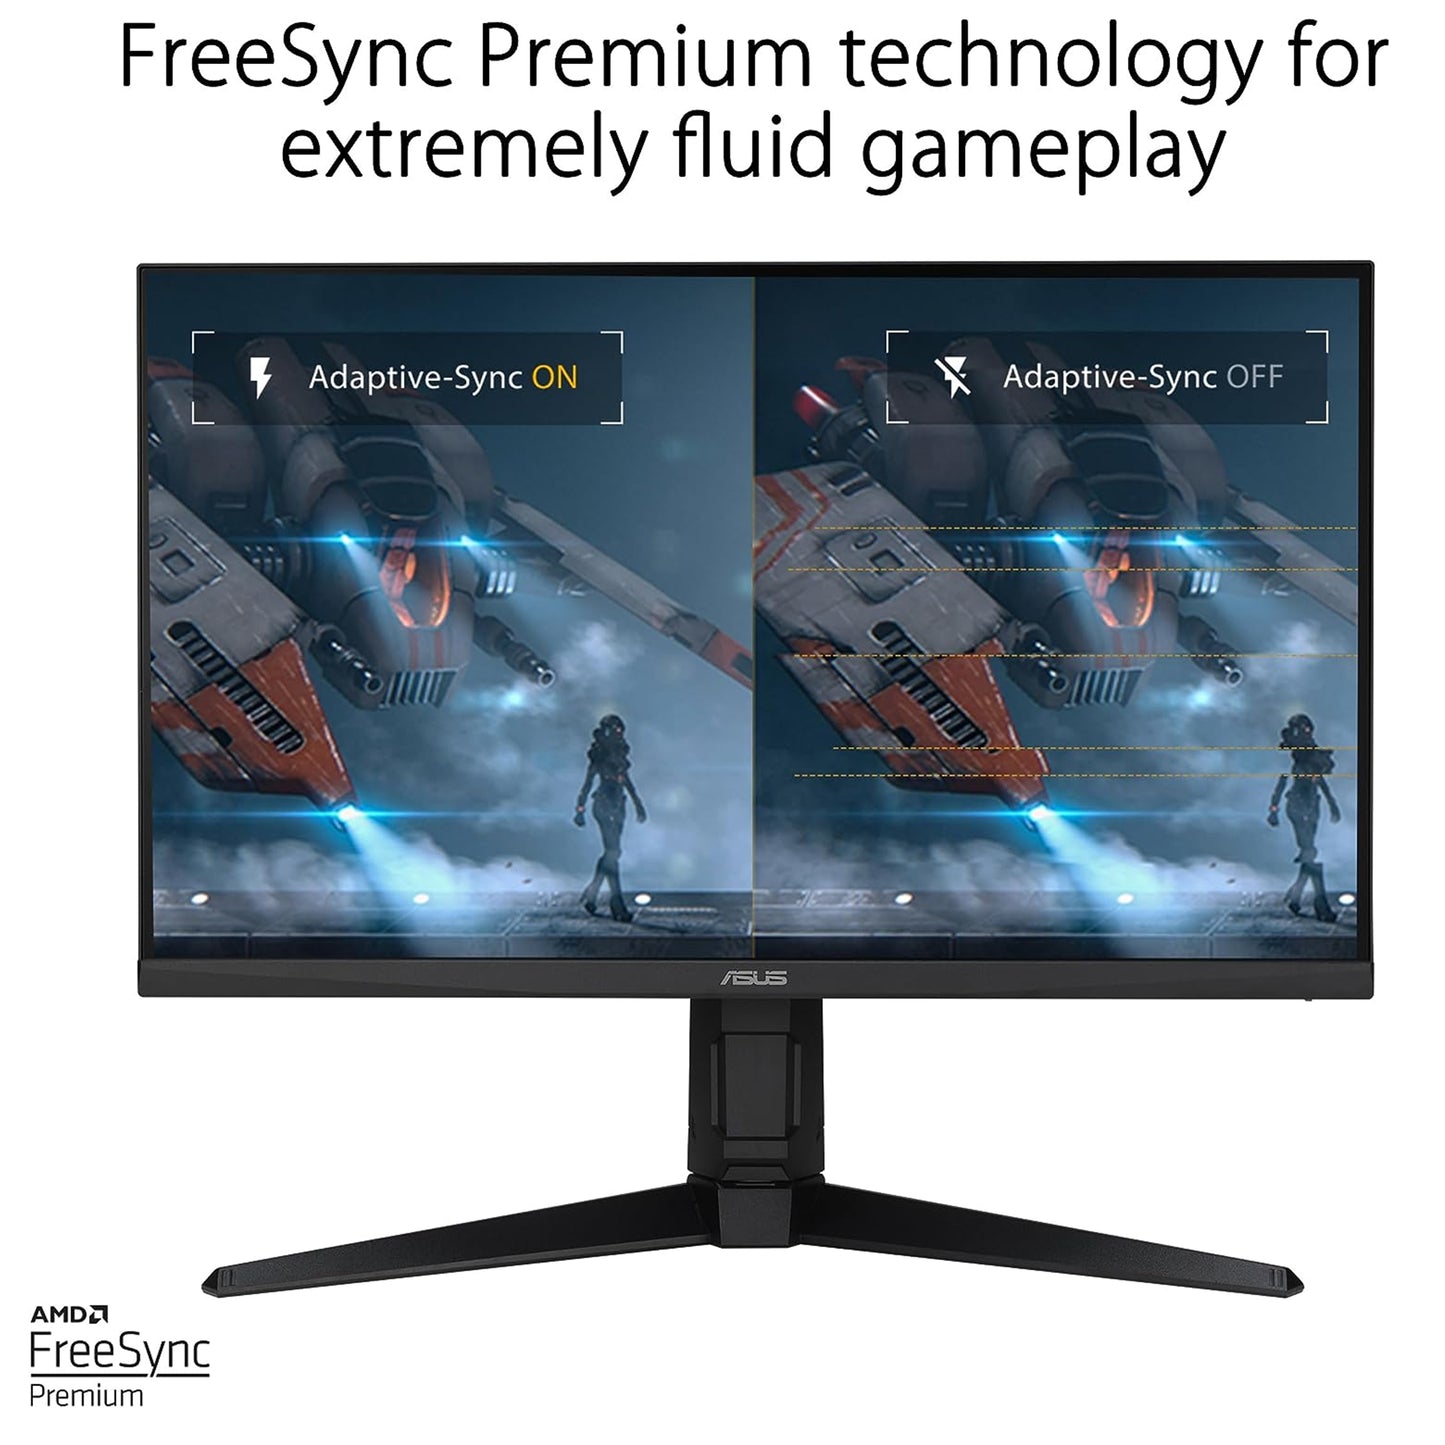 ASUS TUF Gaming 27” 1440P Gaming Monitor (VG27AQML1A) - QHD (2560 x 1440), 260Hz, 1ms, Fast IPS, Extreme Low Motion Blur Sync, G-SYNC compatible, FreeSync Premium, Variable Overdrive, DisplayHDR 40